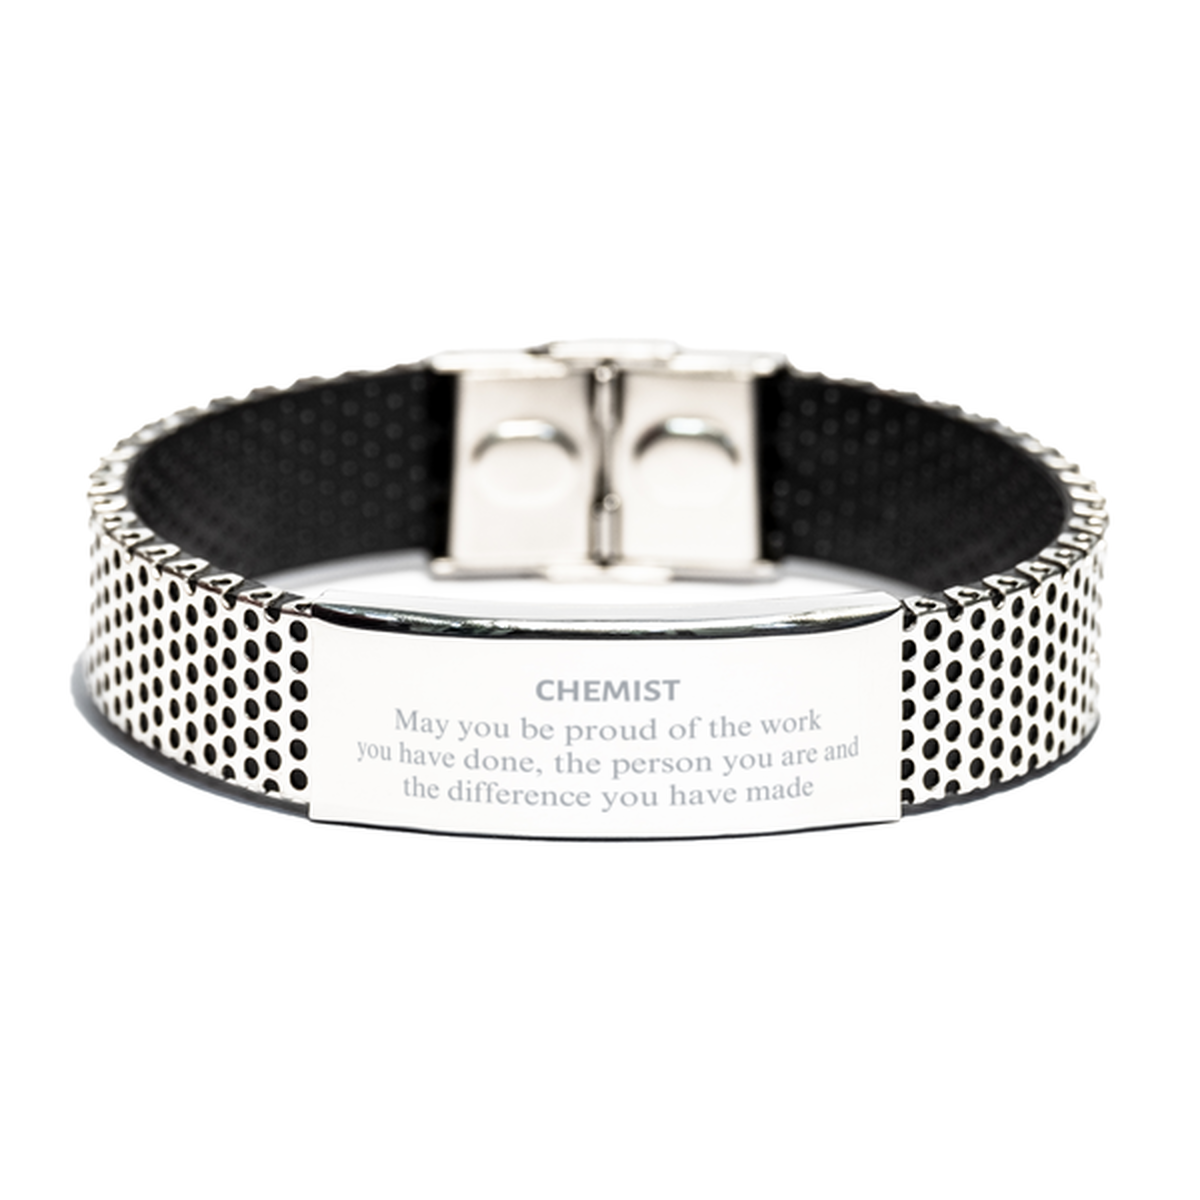 Chemist May you be proud of the work you have done, Retirement Chemist Stainless Steel Bracelet for Colleague Appreciation Gifts Amazing for Chemist